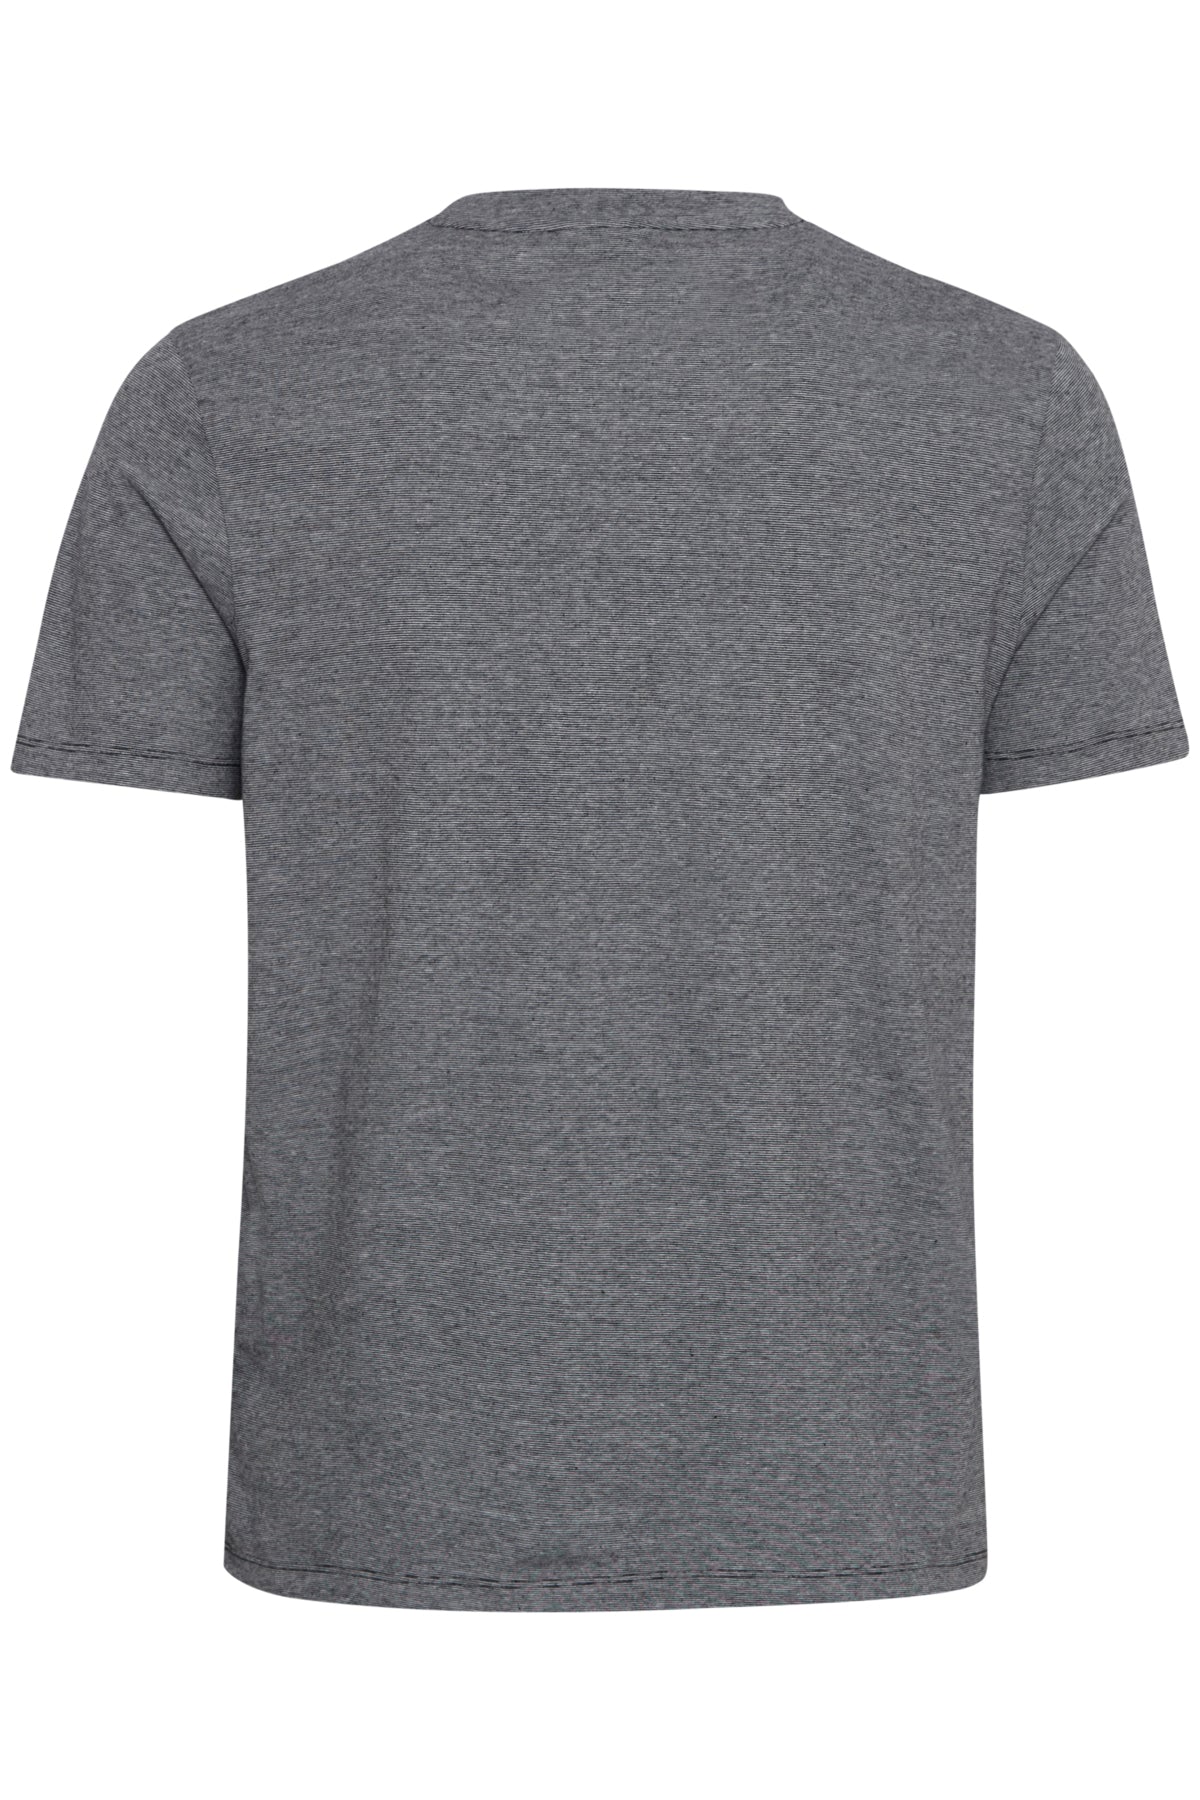 Thor Micro Striped Tee - Pewter Mix - The Sons online